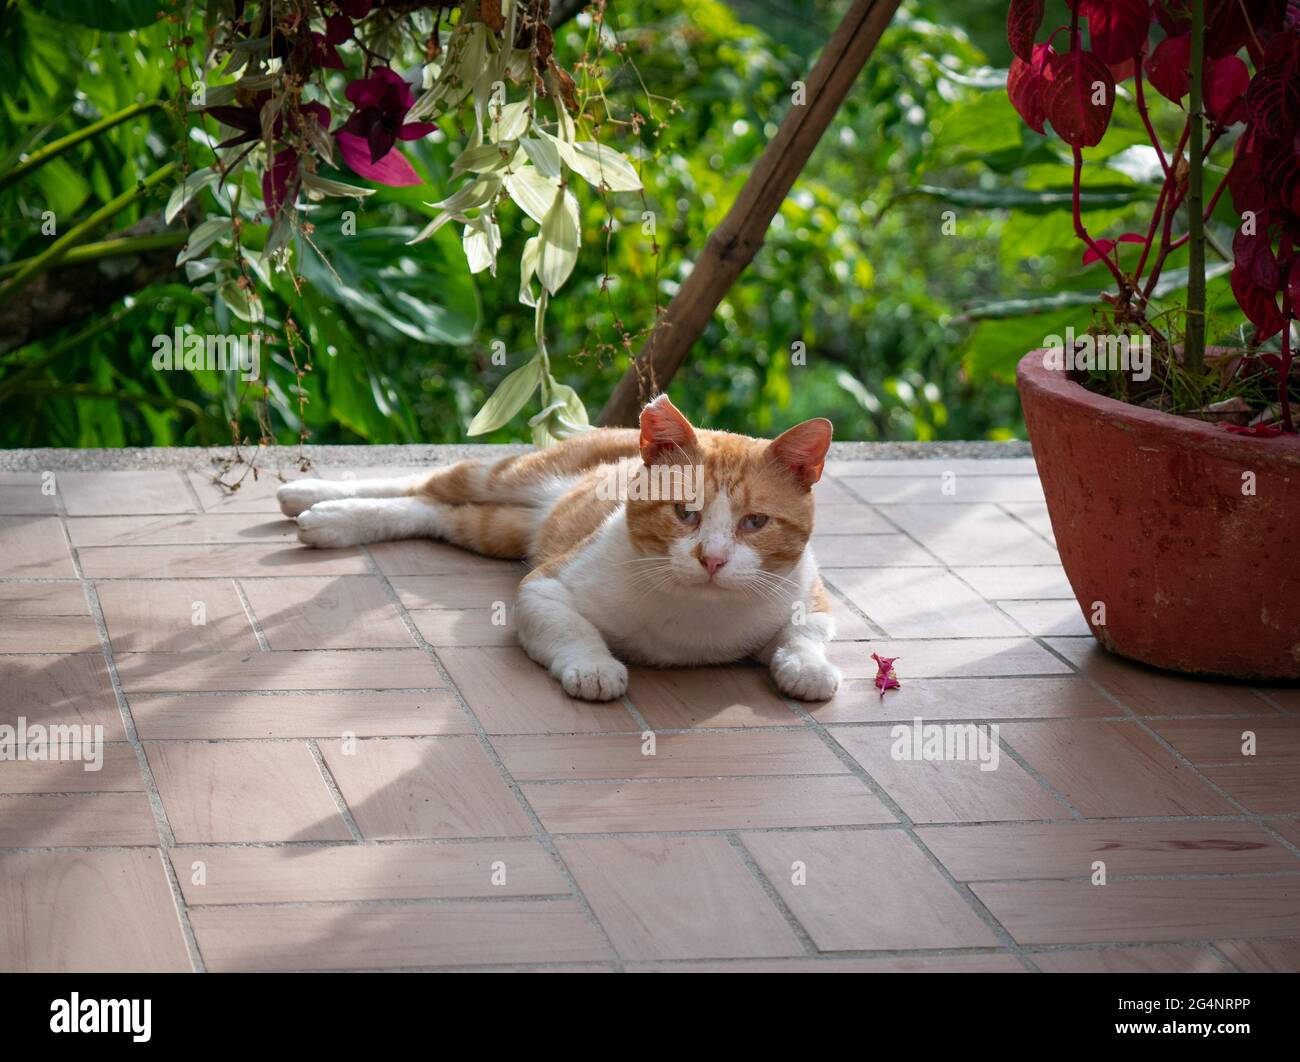 White Cat with Strabismus in the Eyes Sitting in the Garden in Minca, Colombia Stock Photo